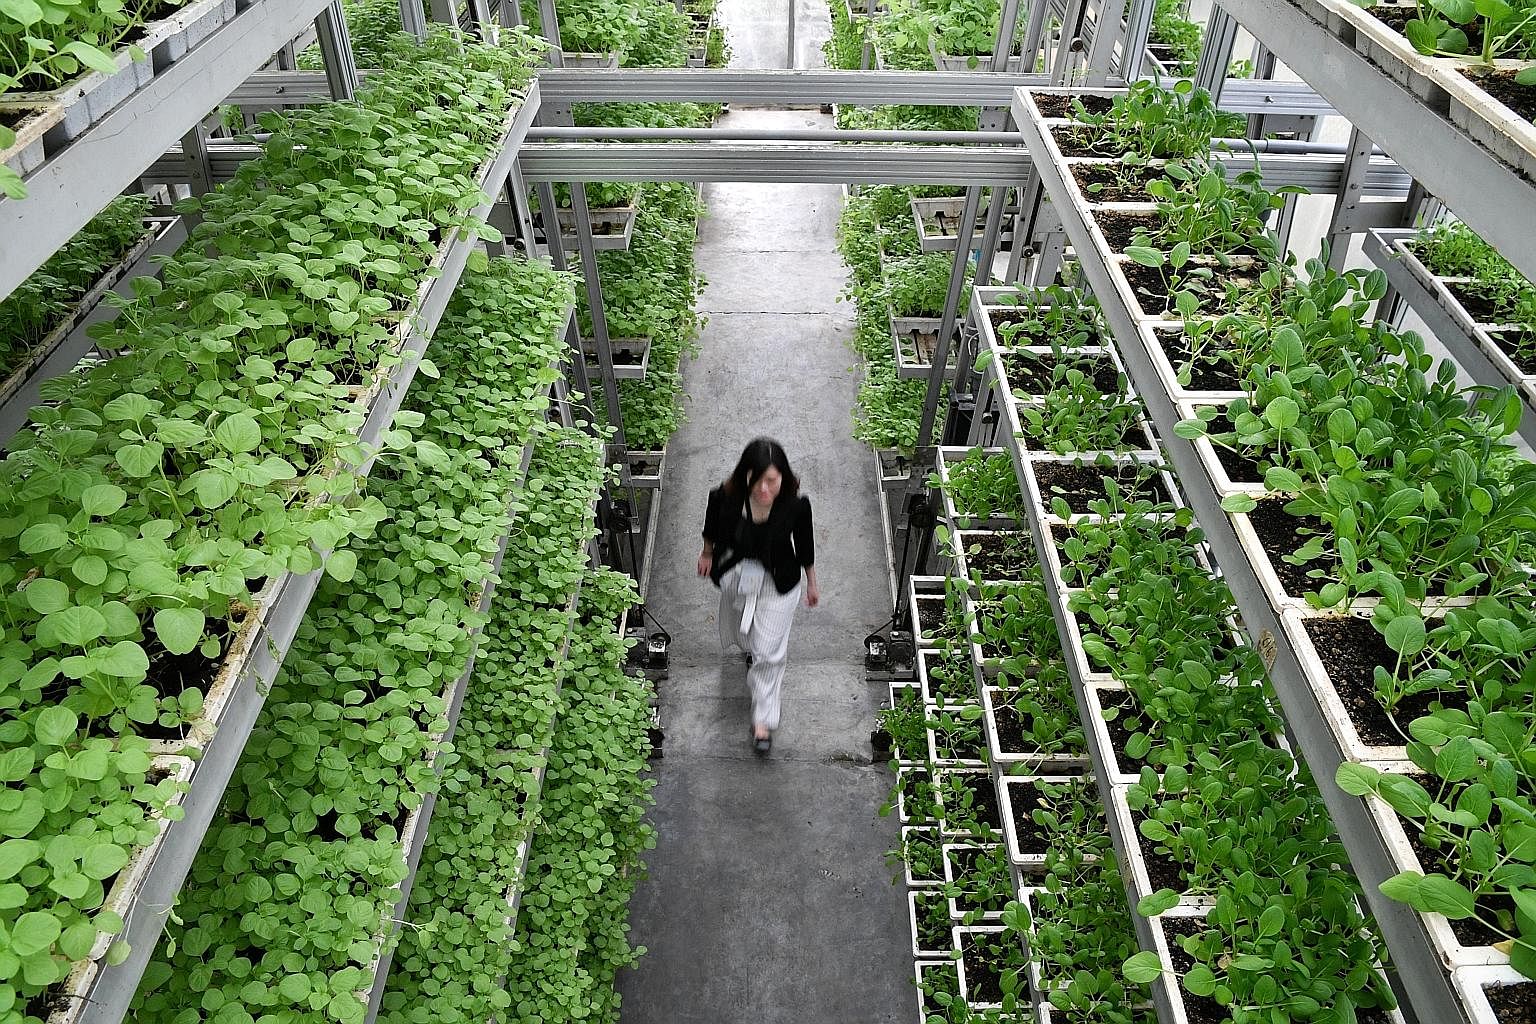 Singapore's agri-food industry received a boost when Sky Greens, an urban farm in Lim Chu Kang, received certification under the world's first national standard for organic vegetables grown in urban environments. The Singapore Standard 632 for organi